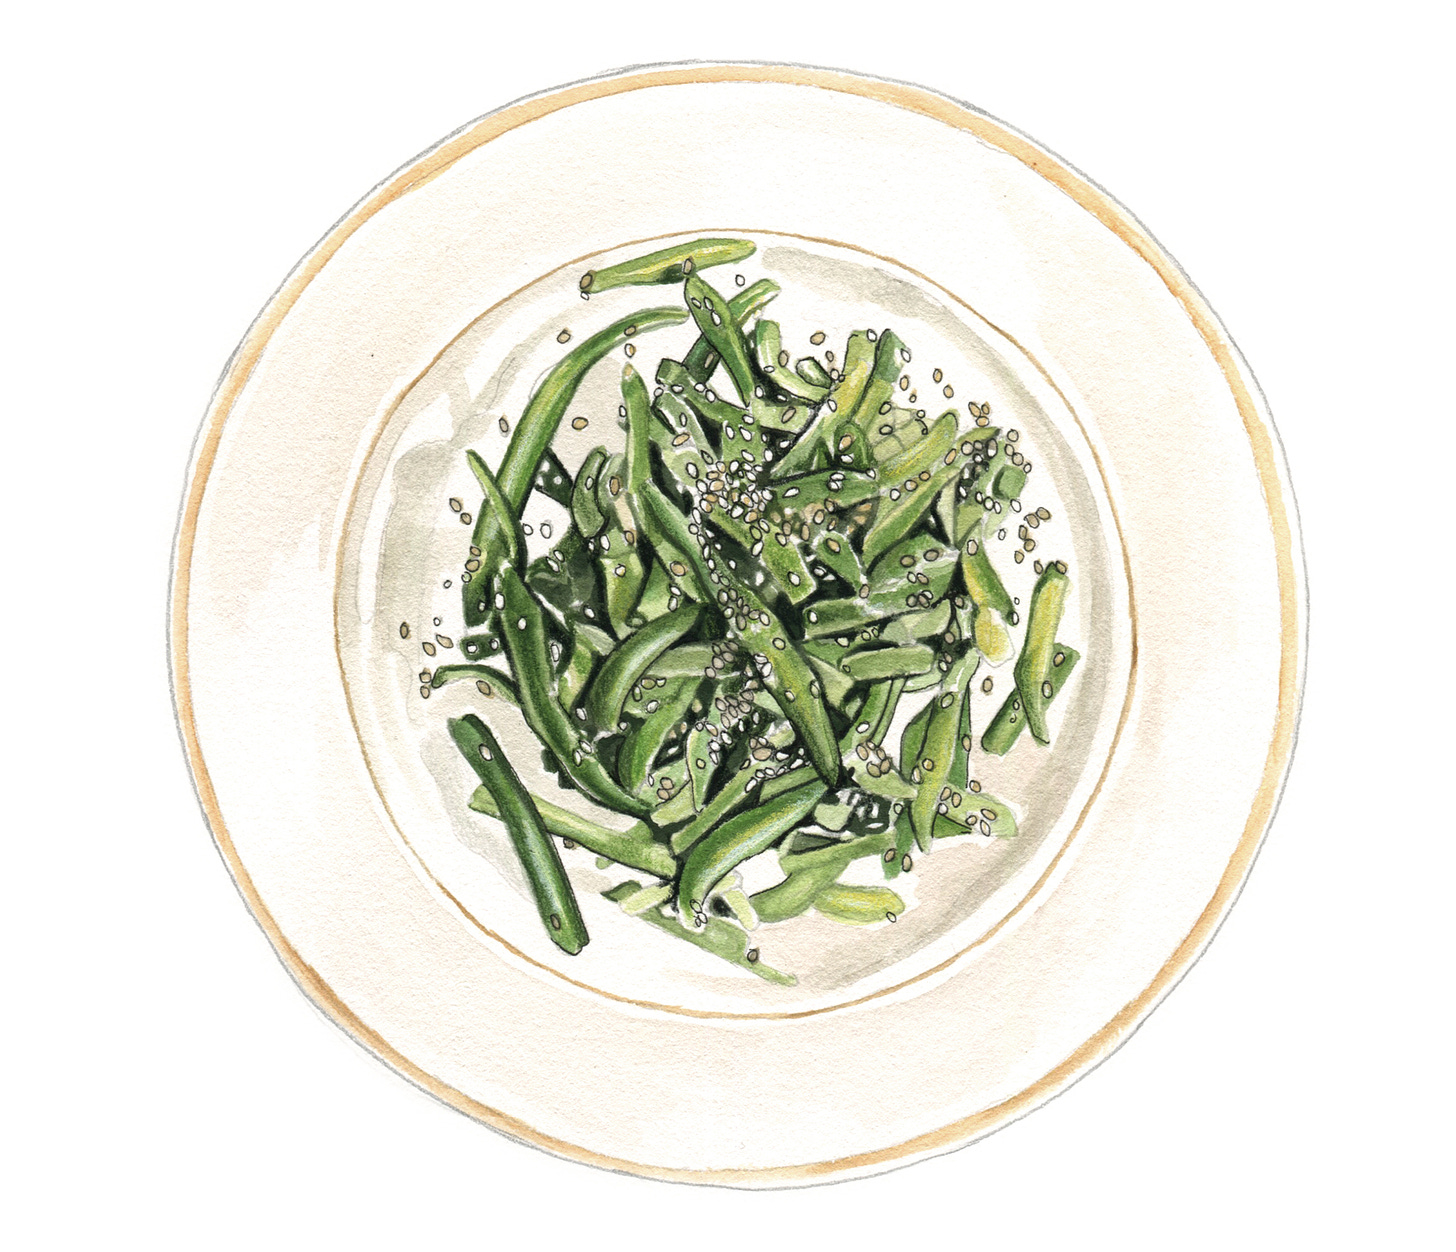 A painting of a gold rimmed plate with green beans on top, sesame seeds sprinkled across. 